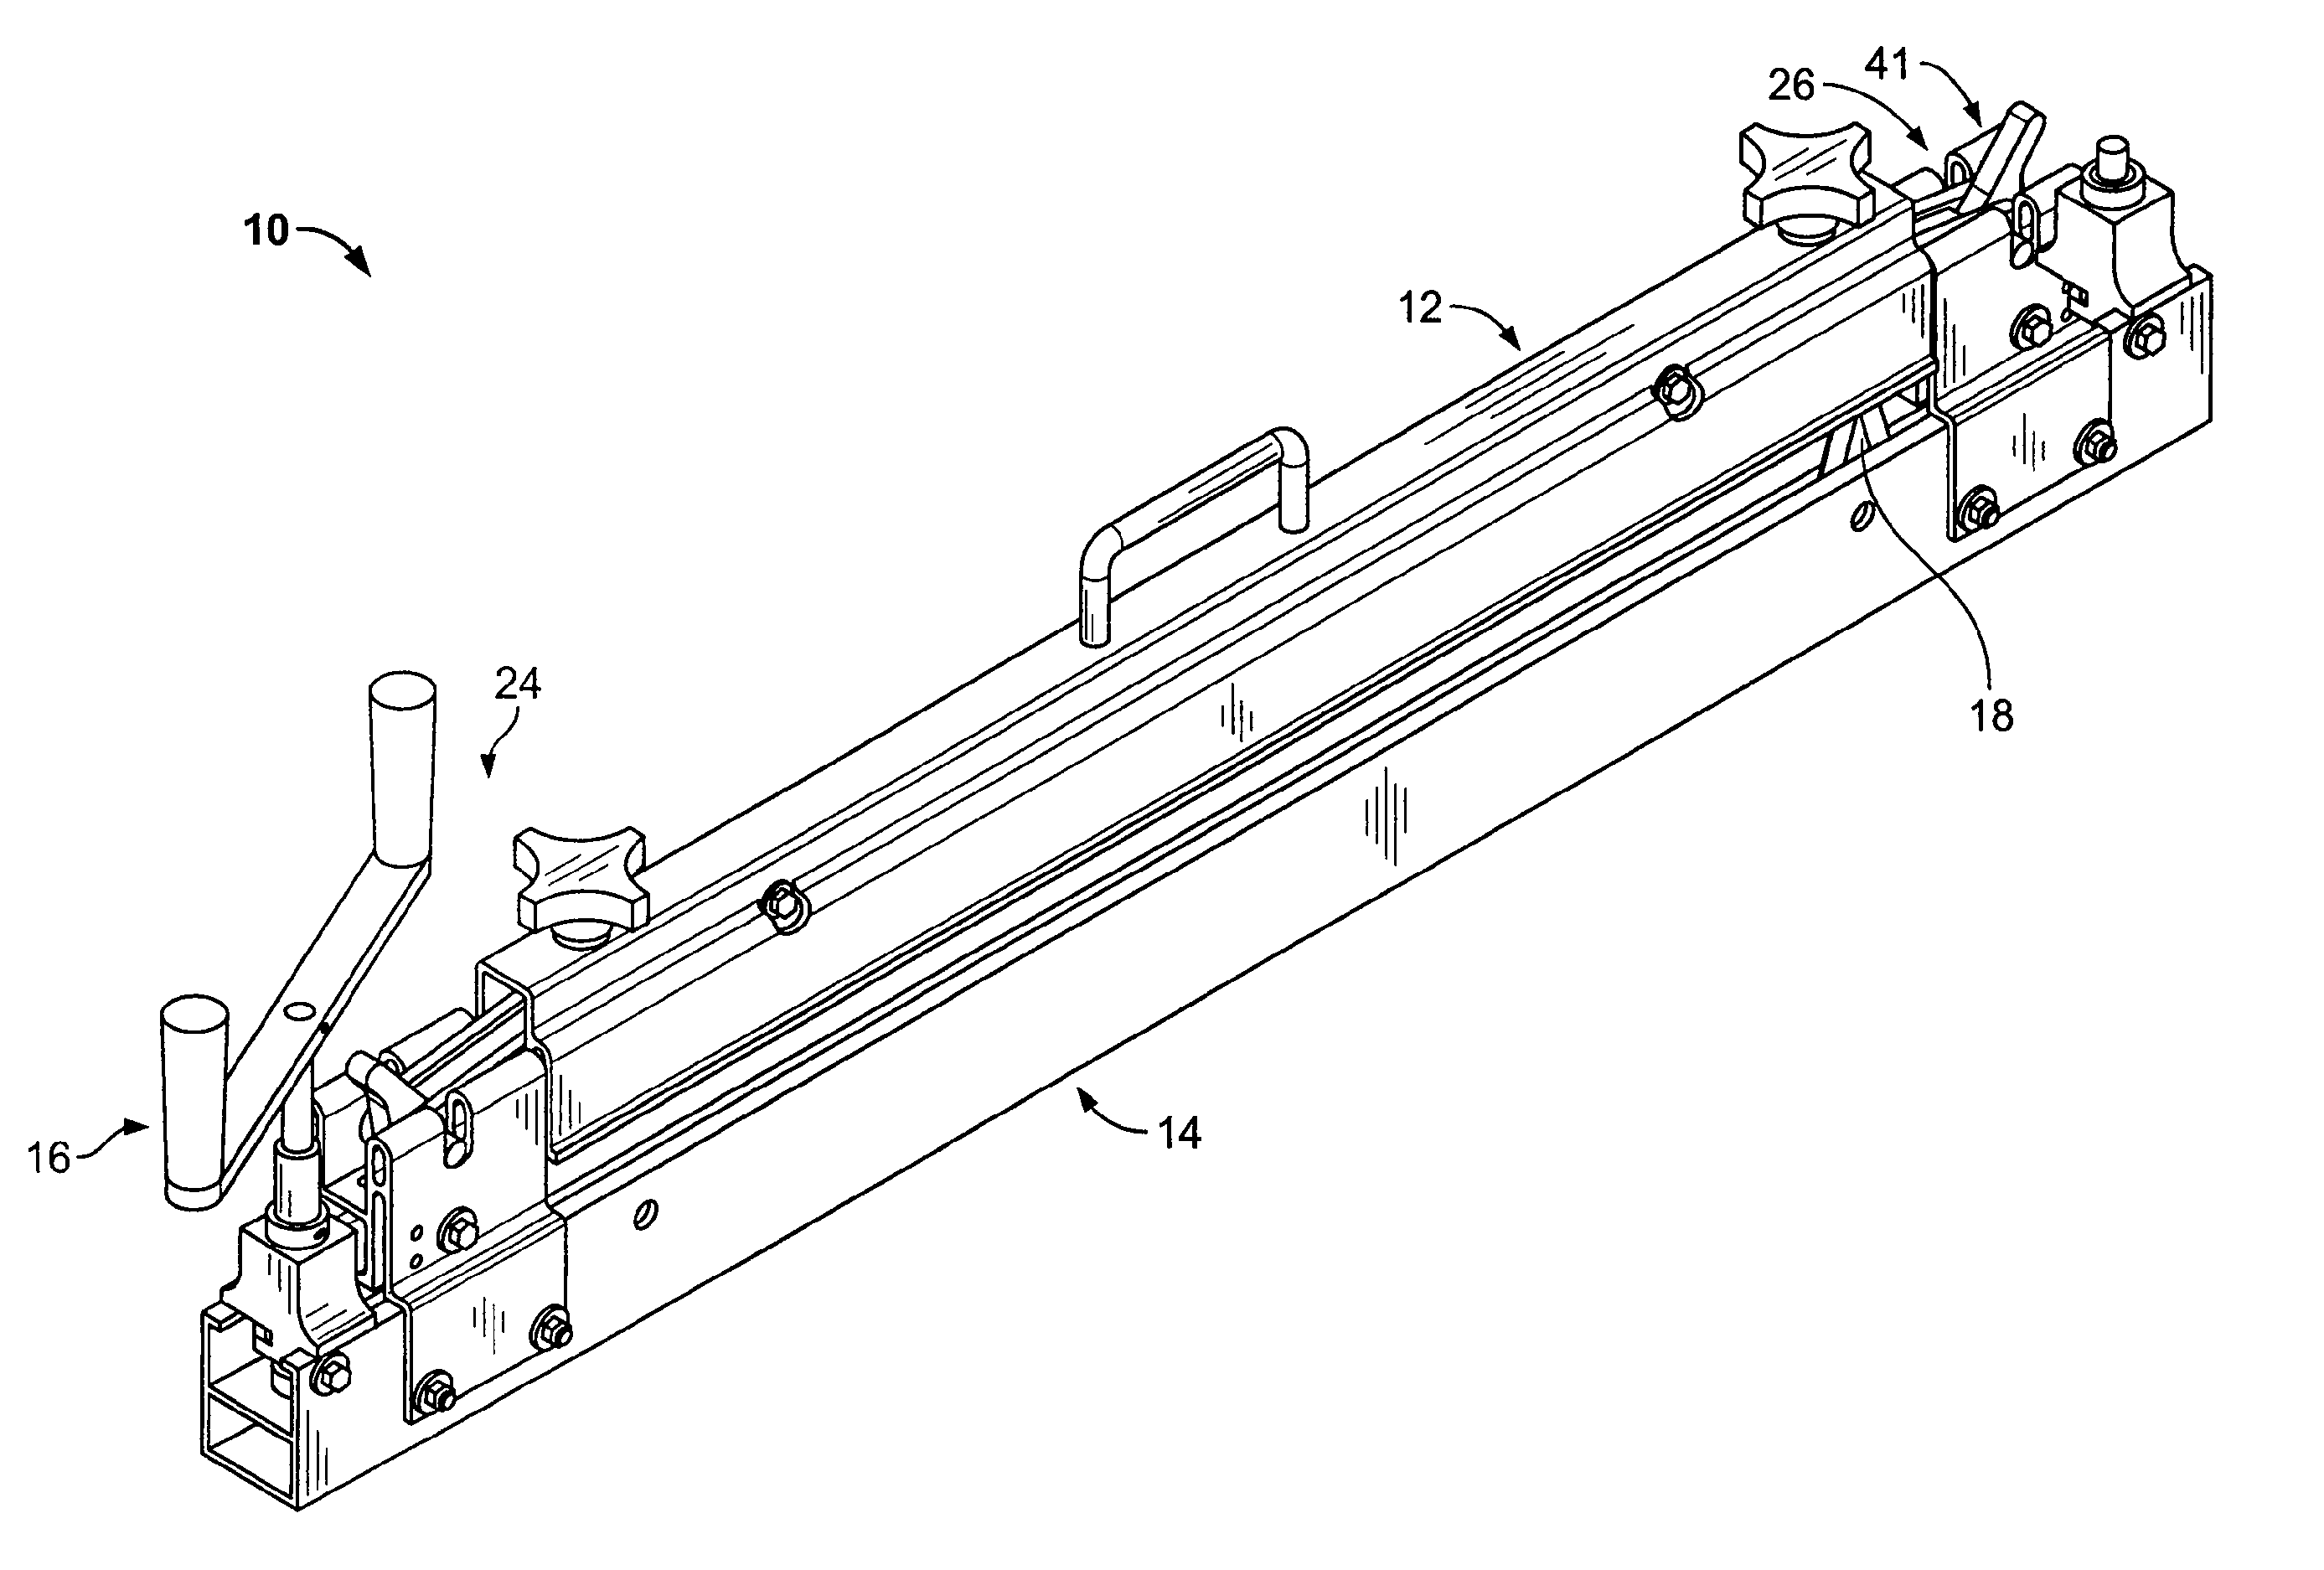 Clamping and cutting apparatus for conveyor belts